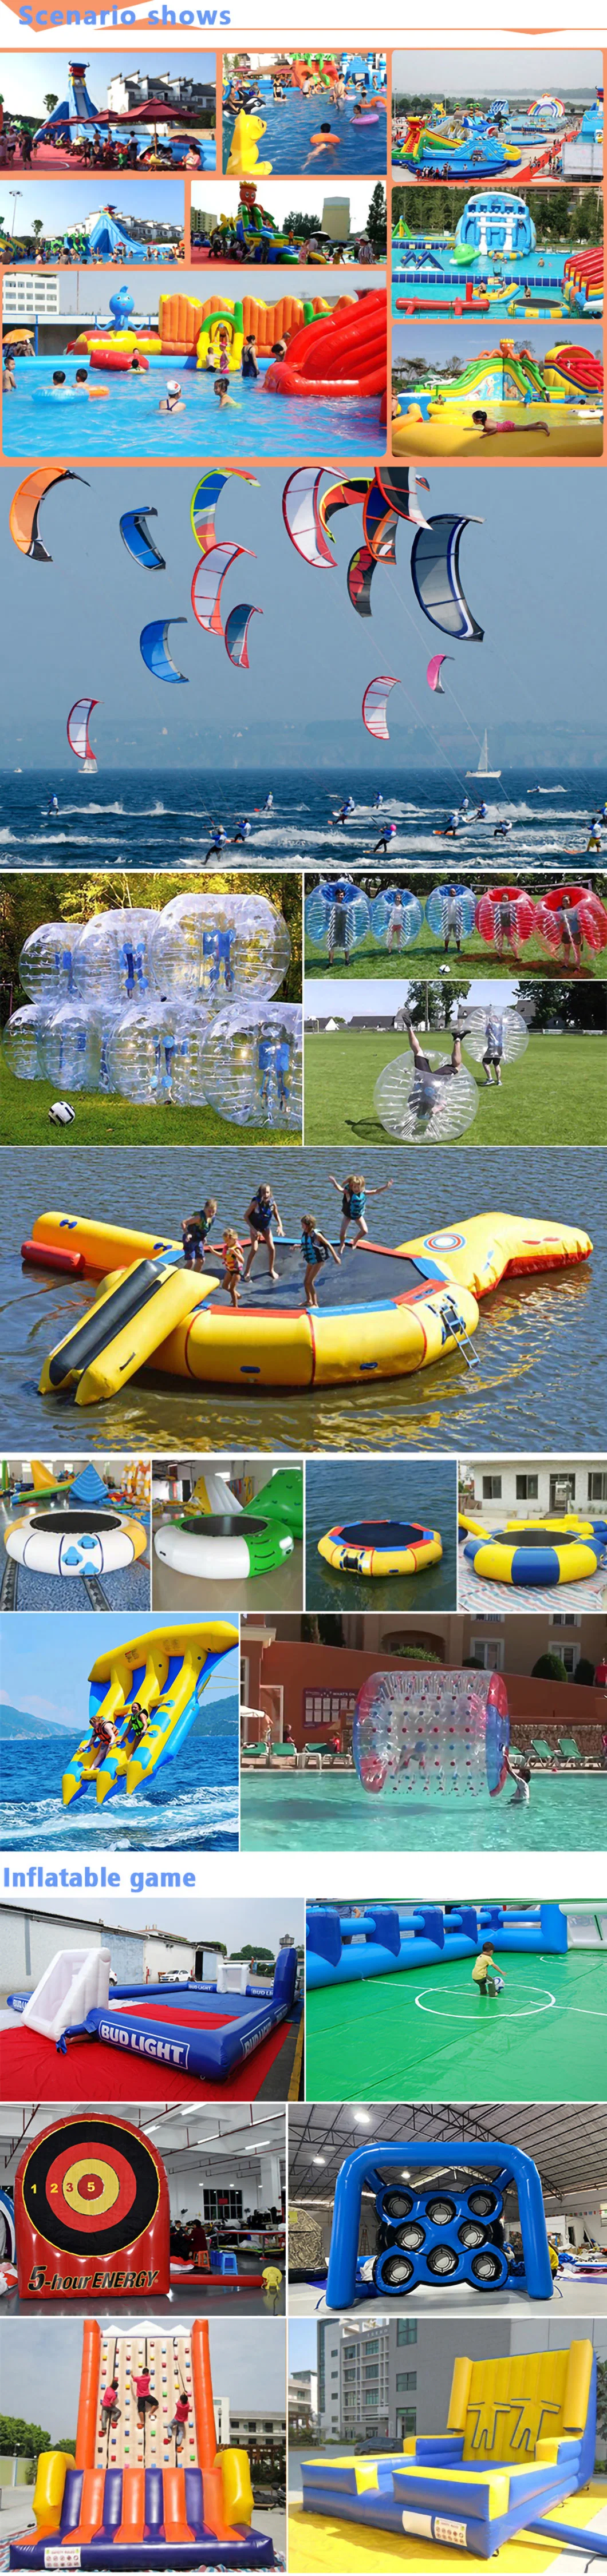 Funny PVC Giant Inflatable Body Zorb Ball, Bubble Soccer Balls Human Balls for Adults